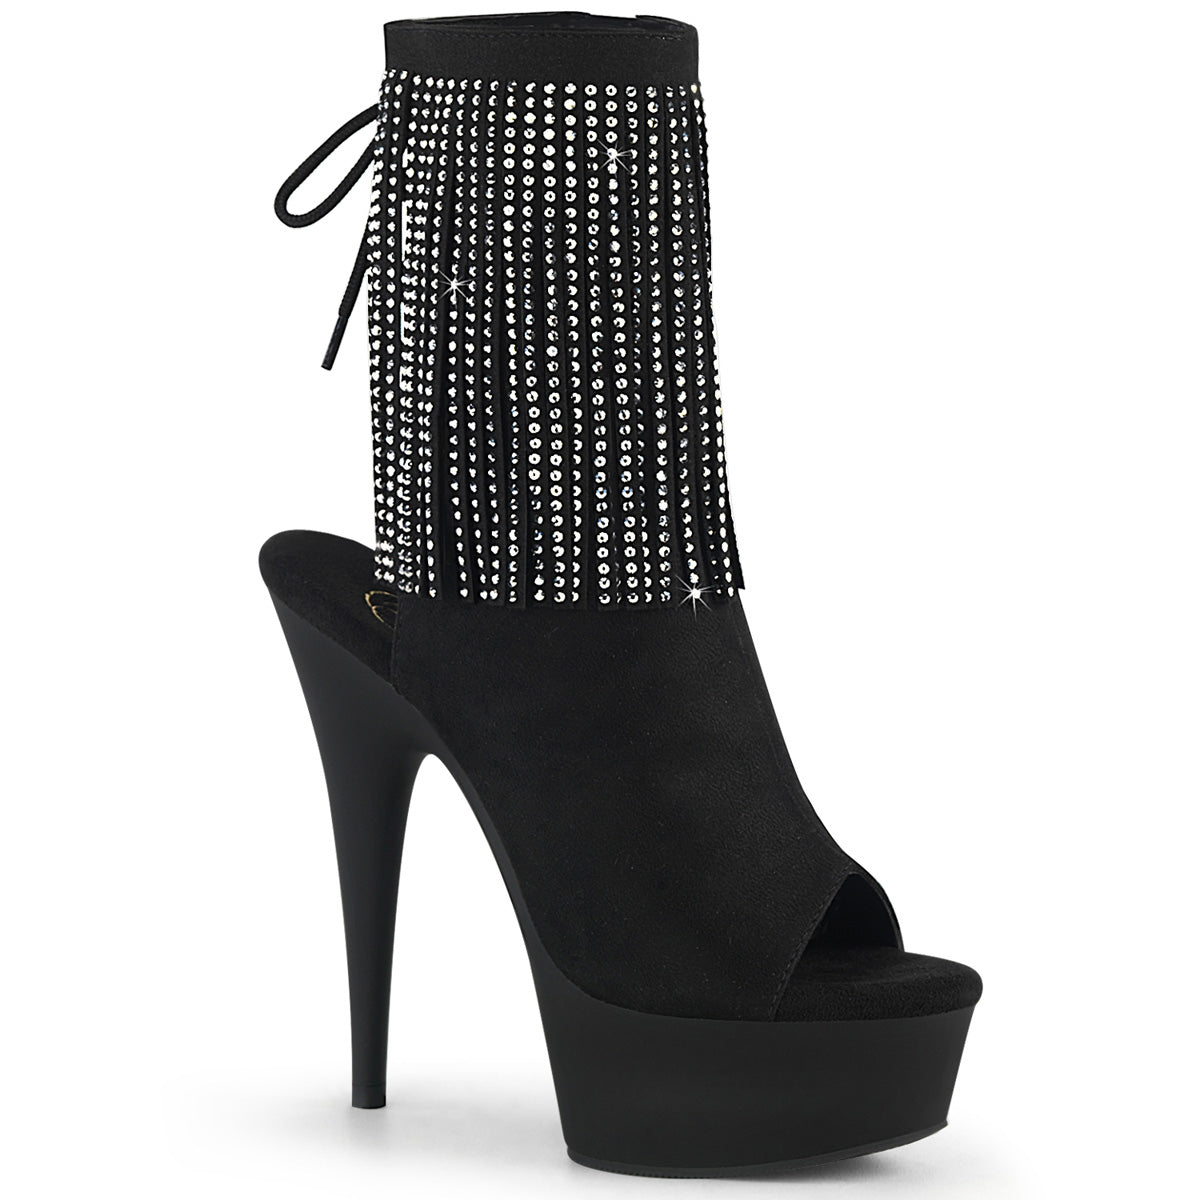 DELIGHT-1018RhinestoneF Black Faux Suede Ankle Boot Pleaser